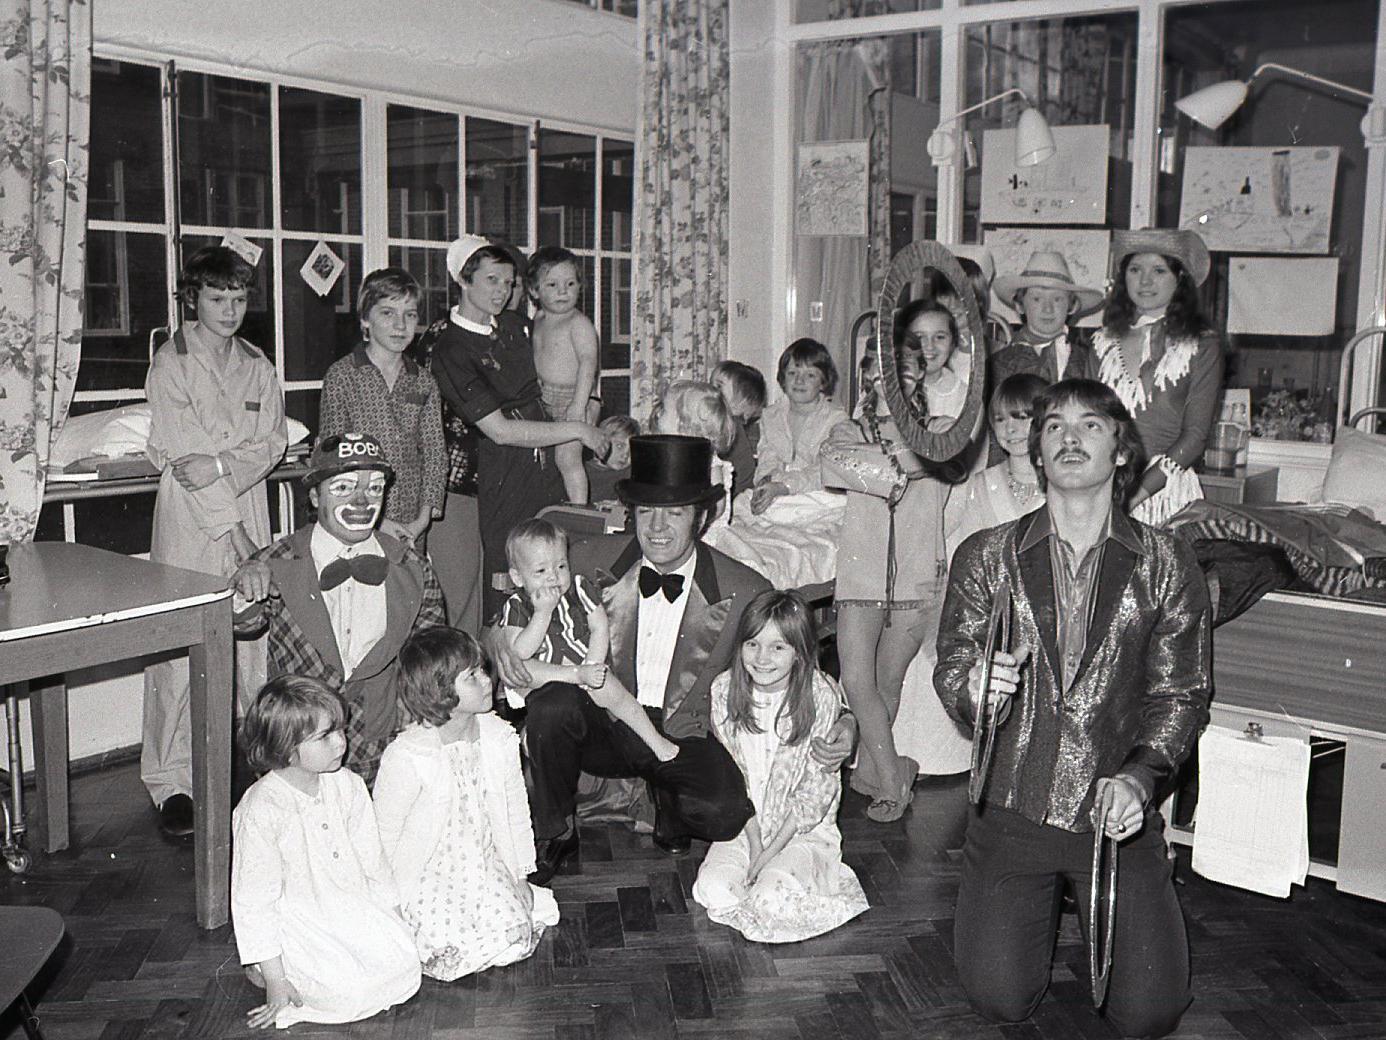 Blackpool Victoria Hospital was in uproar when the stars from the Apollo circus, appearing at the Pleasure Beach over Christmas, turned up to provide an afternoon's entertainment to the delighted patients in the children's ward